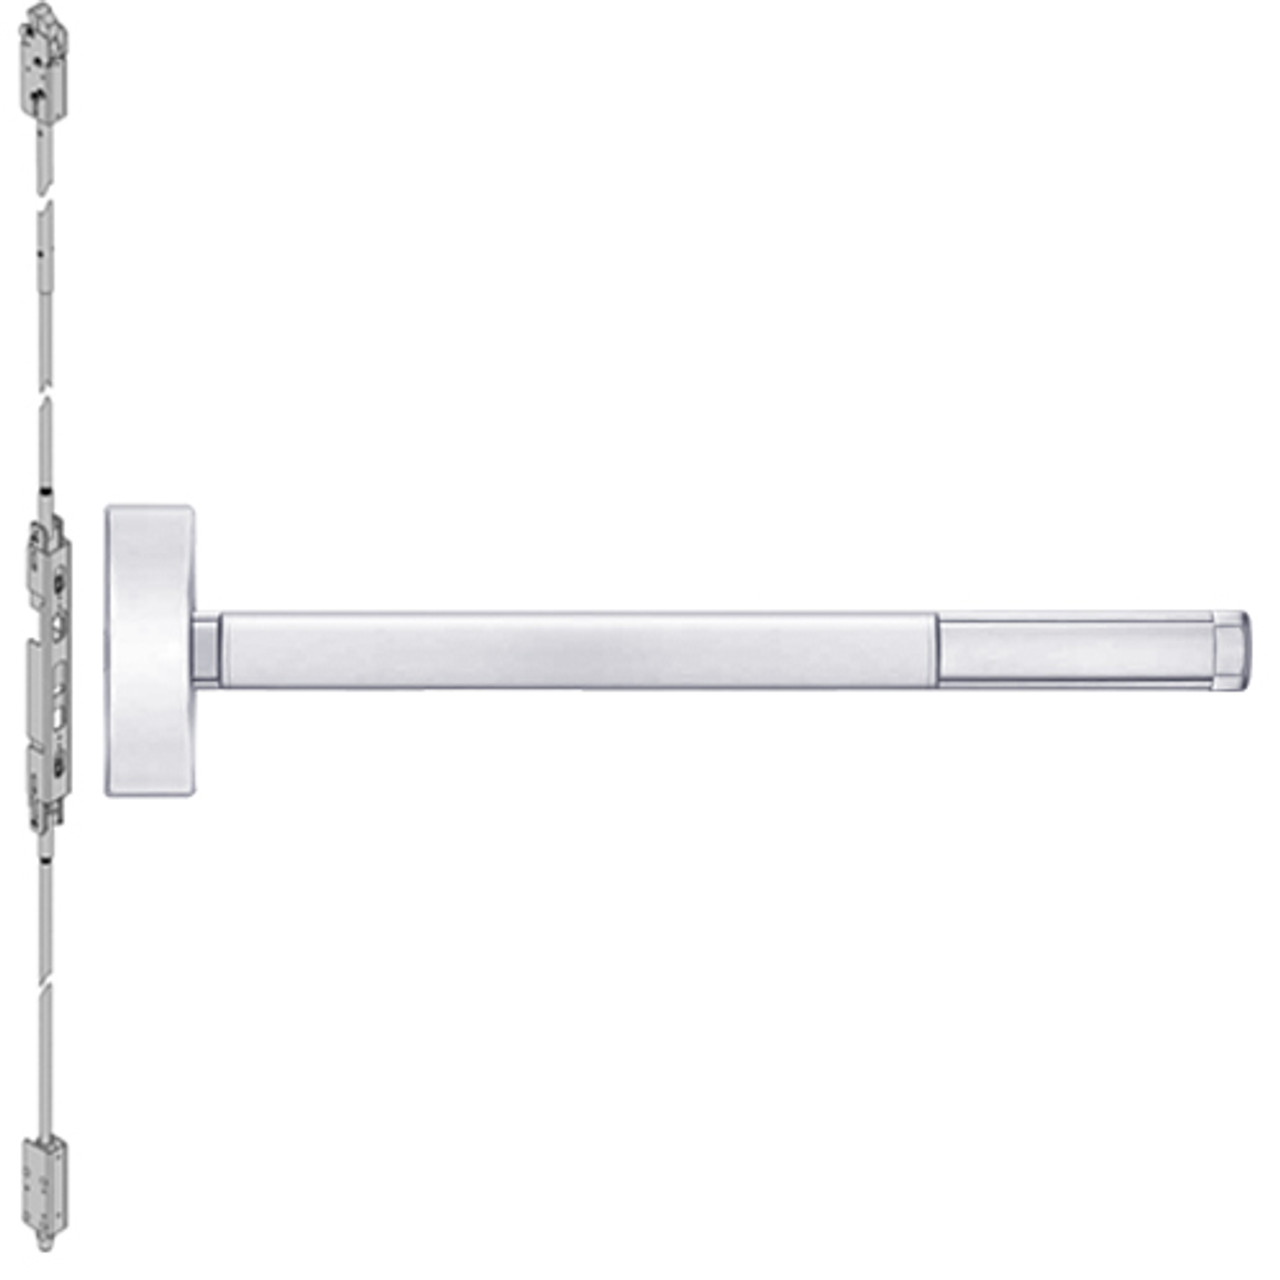 2803LBRCD-625-36 PHI 2800 Series Non Fire Rated Concealed Vertical Rod Exit Device Prepped for Key Retracts Latchbolt in Bright Chrome Finish